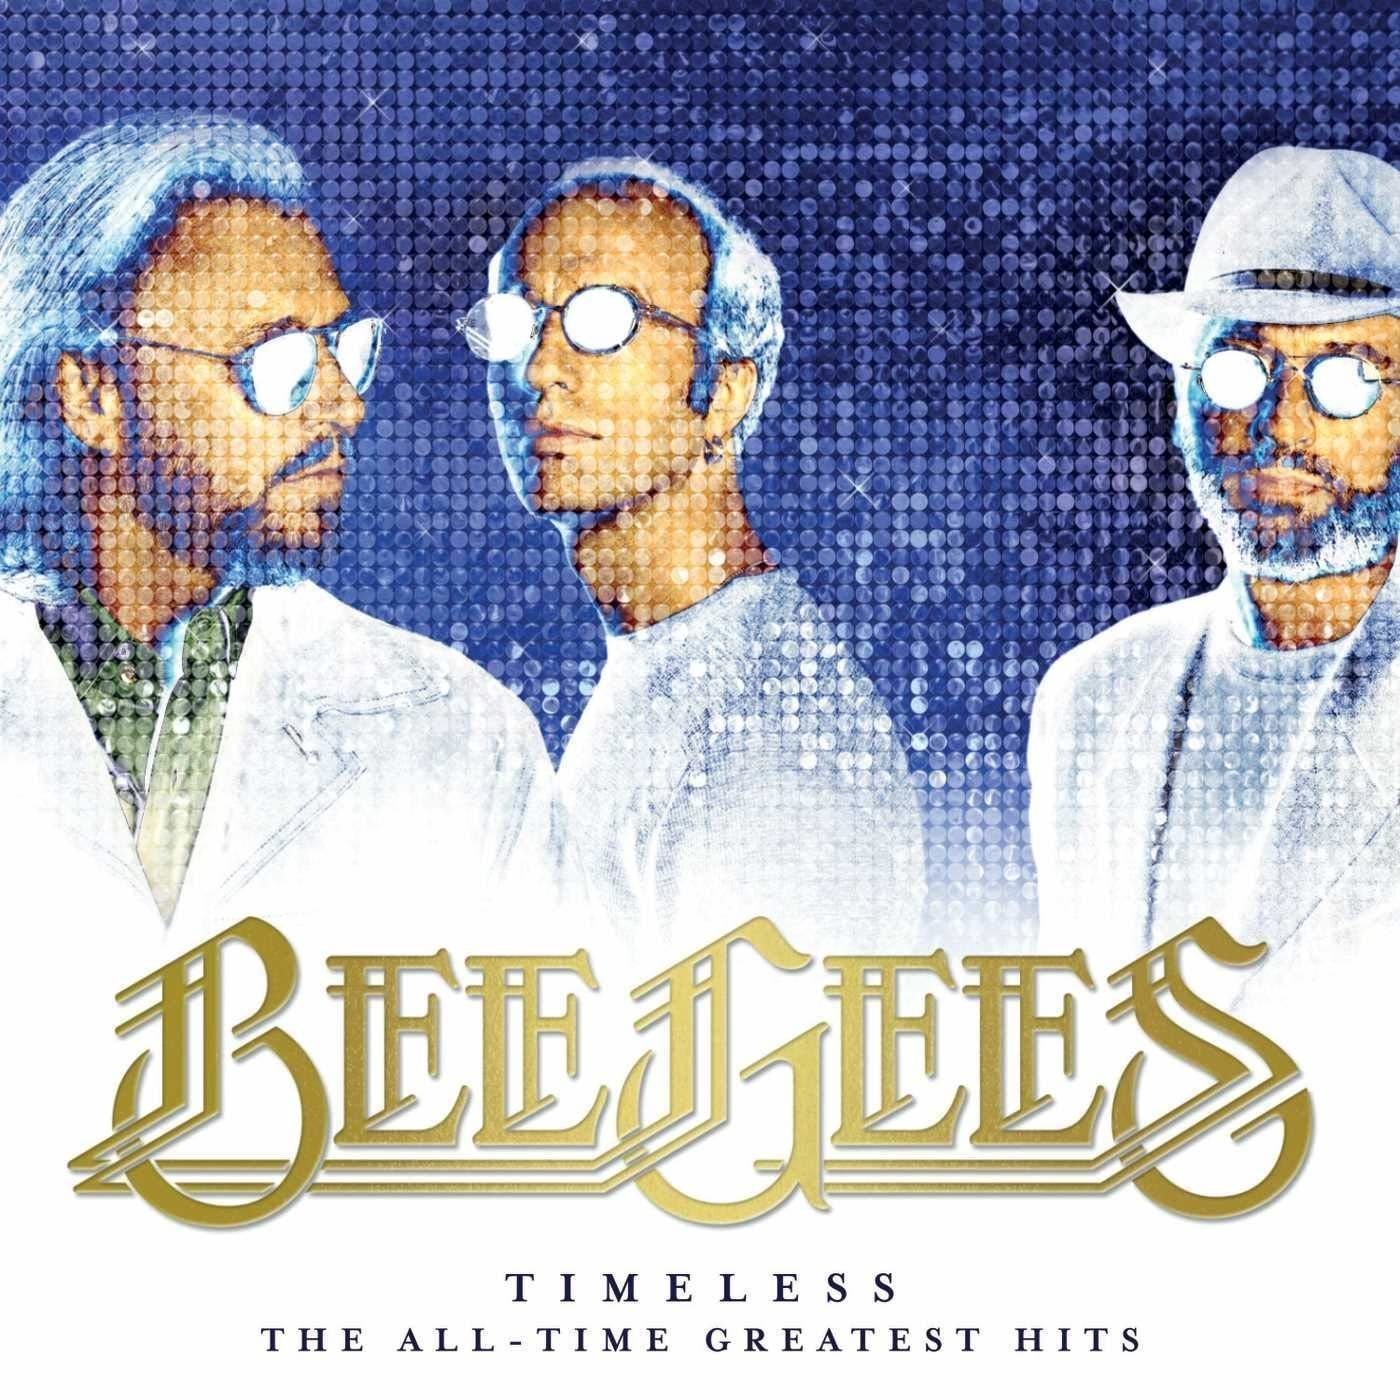 Disco de vinilo Bee Gees - Timeless - The All-Time (2 LP)